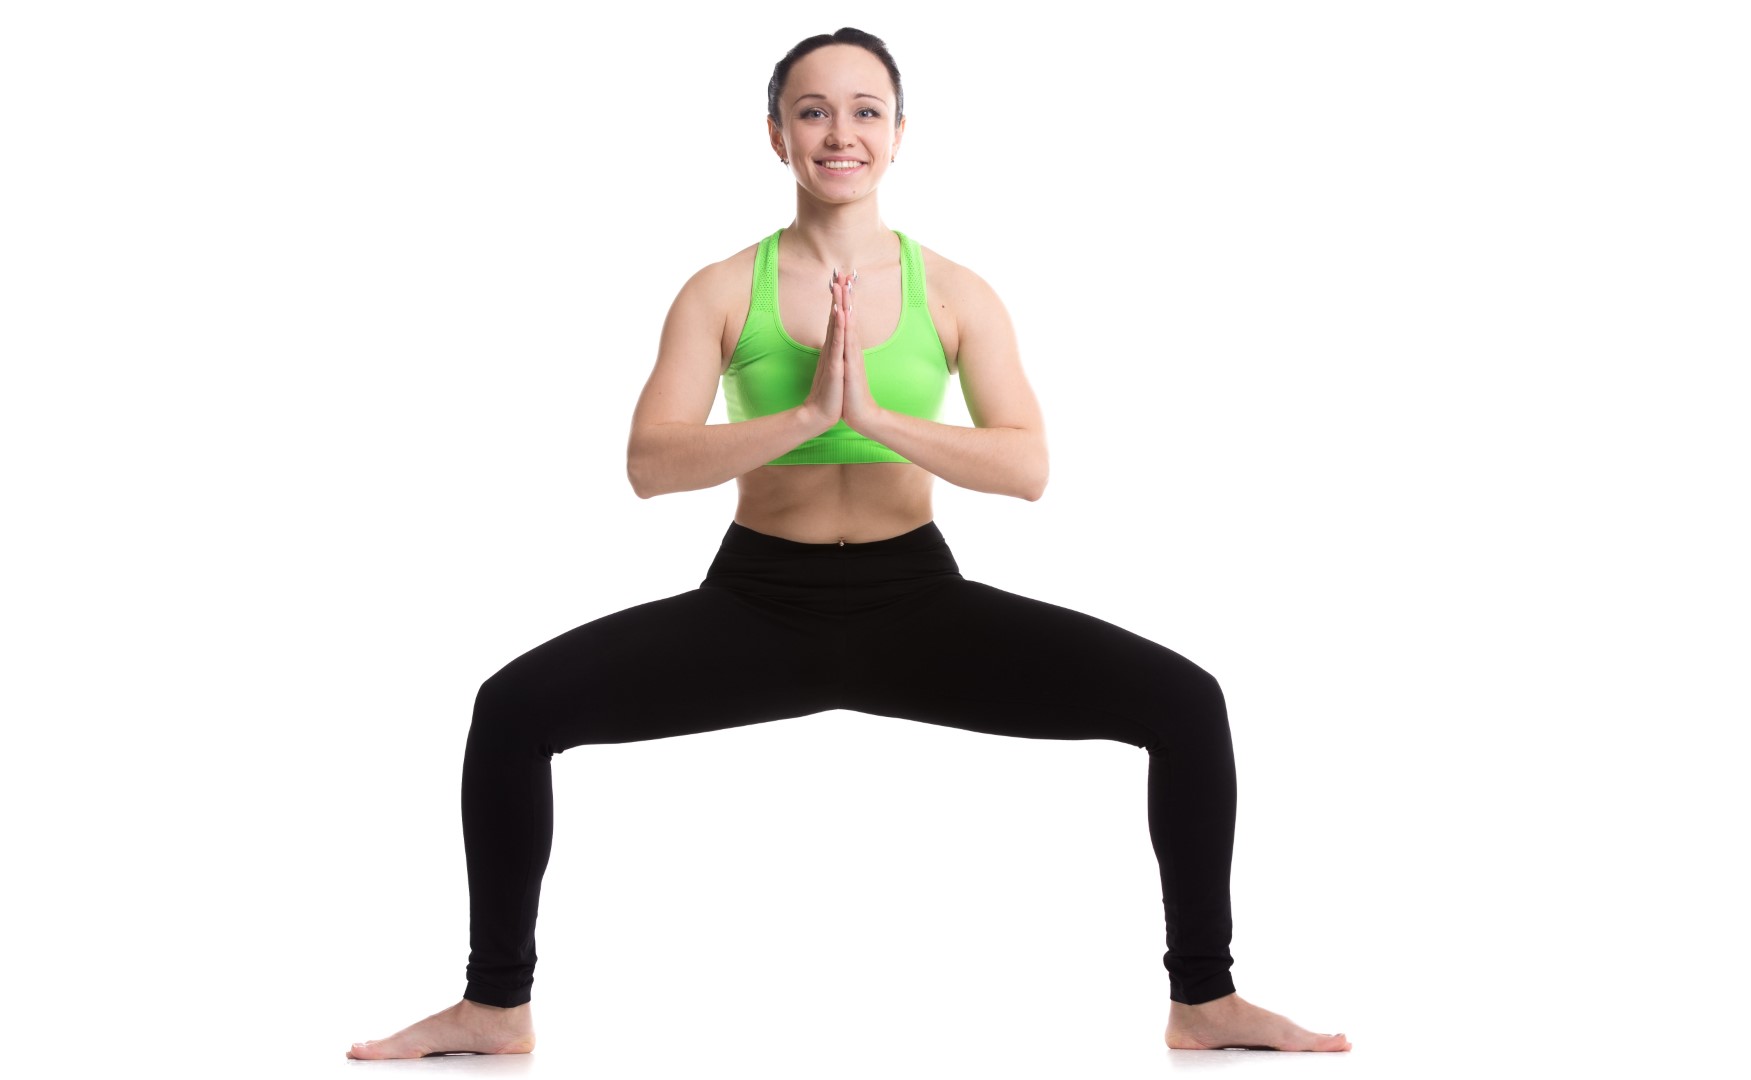 Temple yoga pose demonstrated by a woman